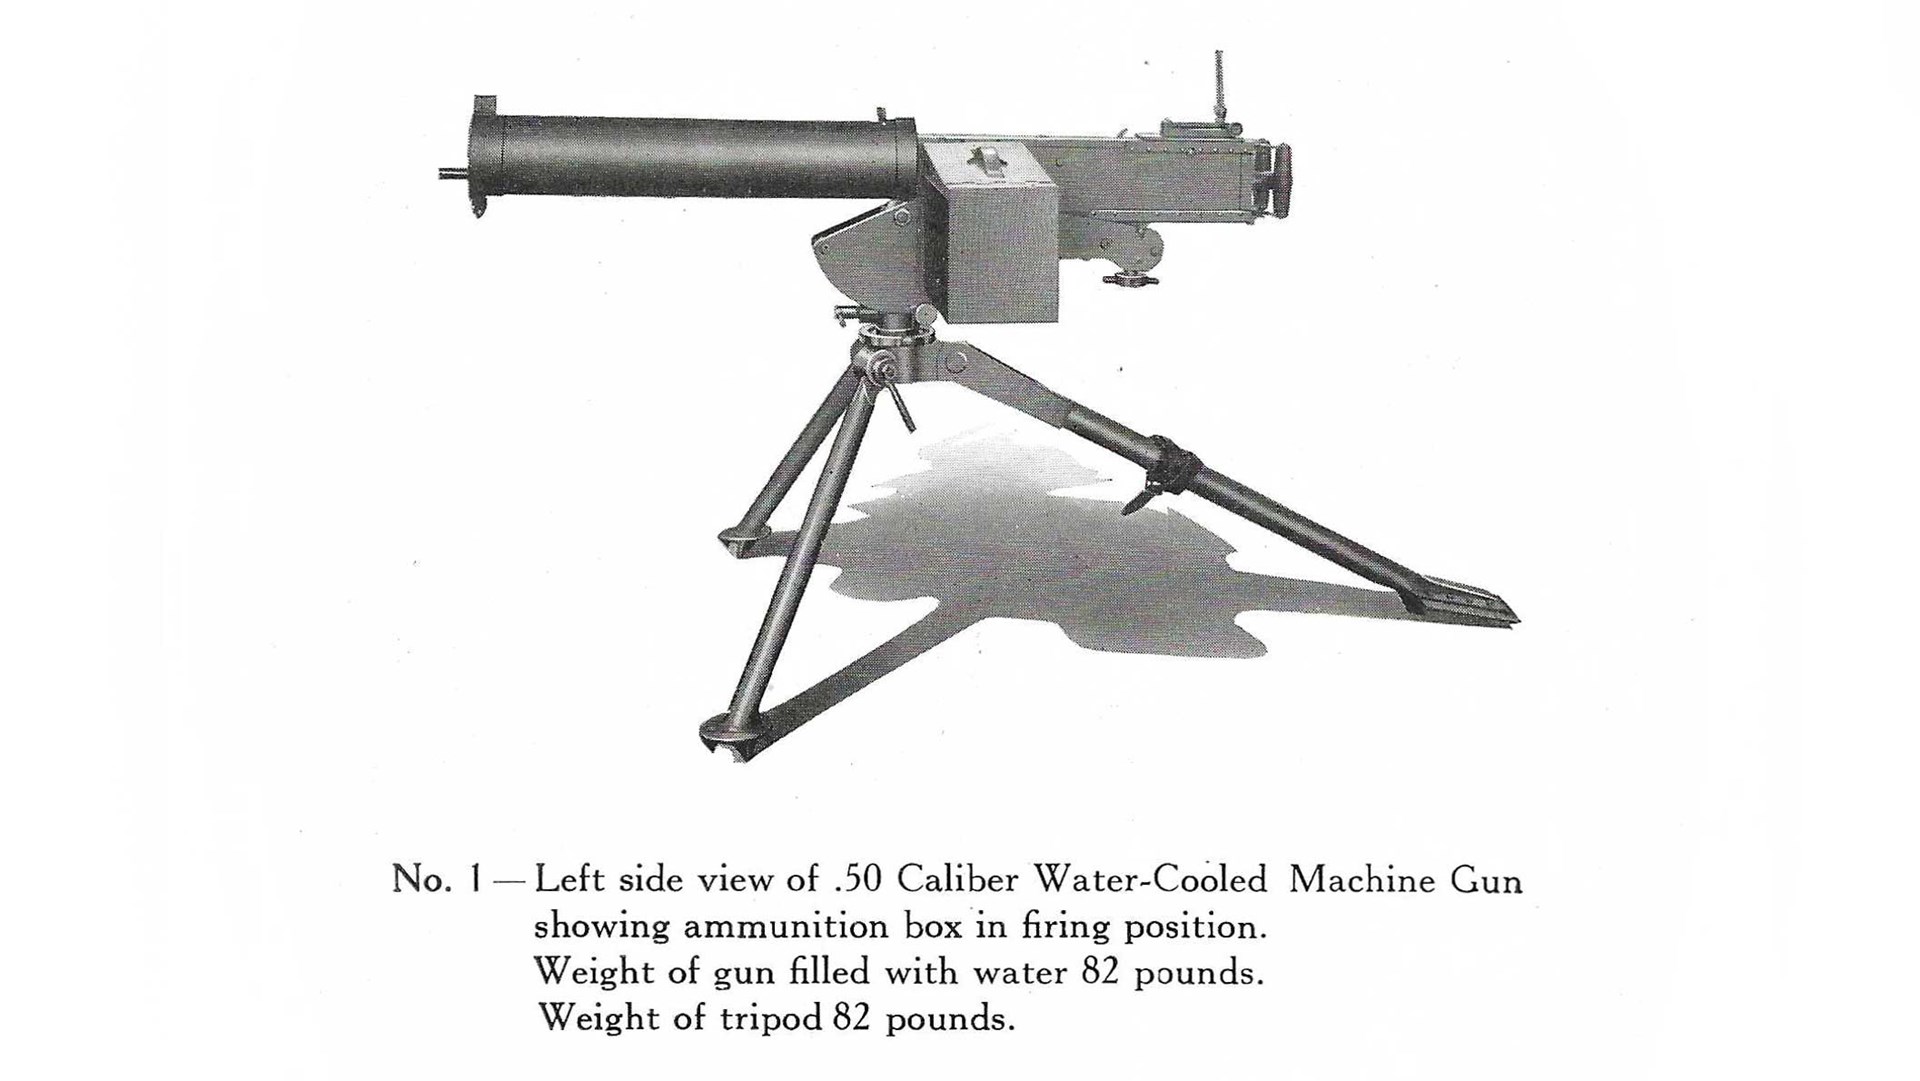 left side view of the Colt Model 1924 Water-Cooled Machine Gun